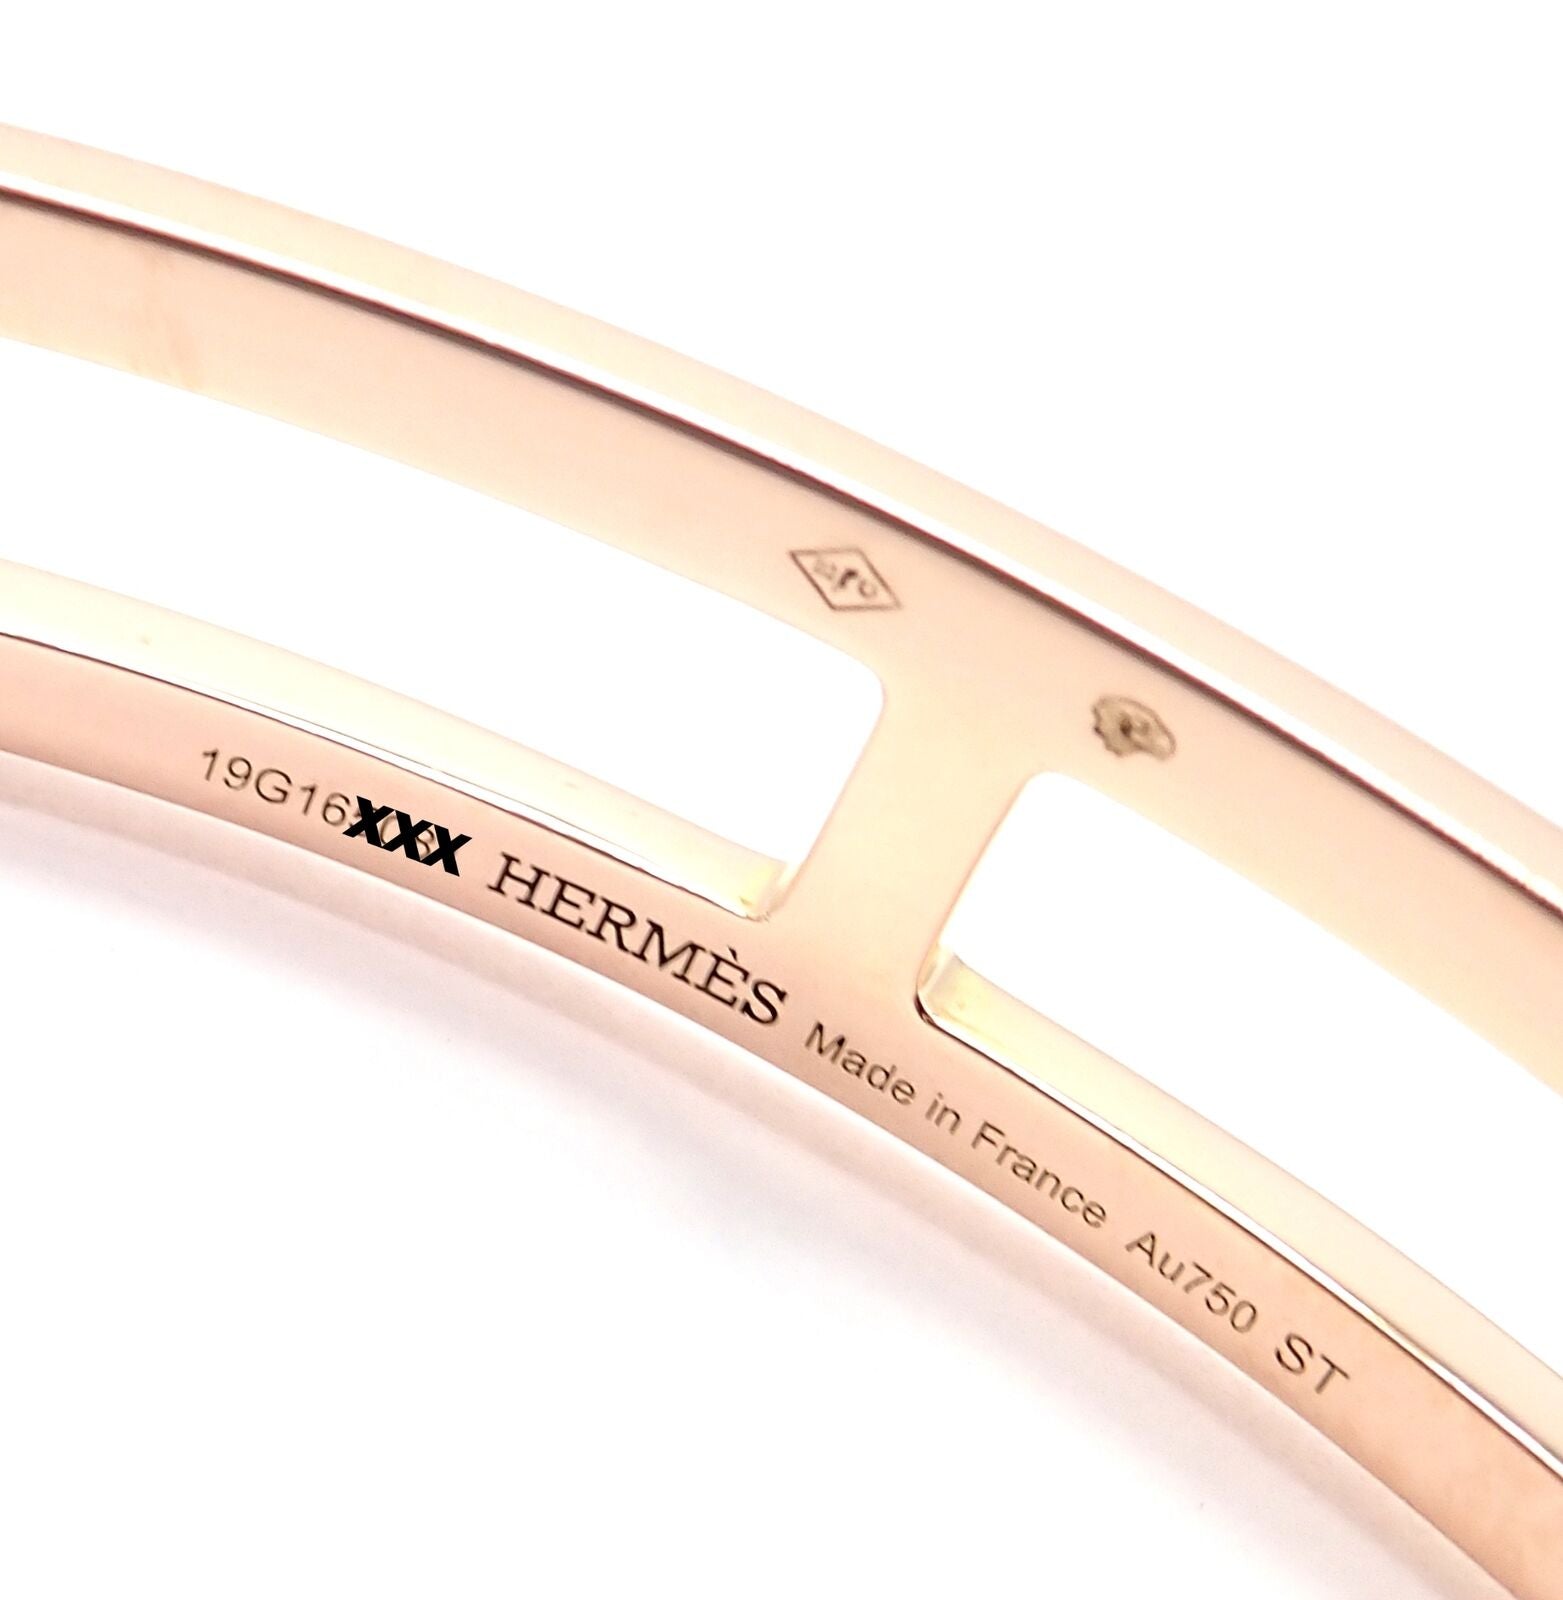 Hermes Jewelry & Watches:Fine Jewelry:Bracelets & Charms Authentic! Hermes 18k Rose Gold H Open Cuff Bangle Bracelet